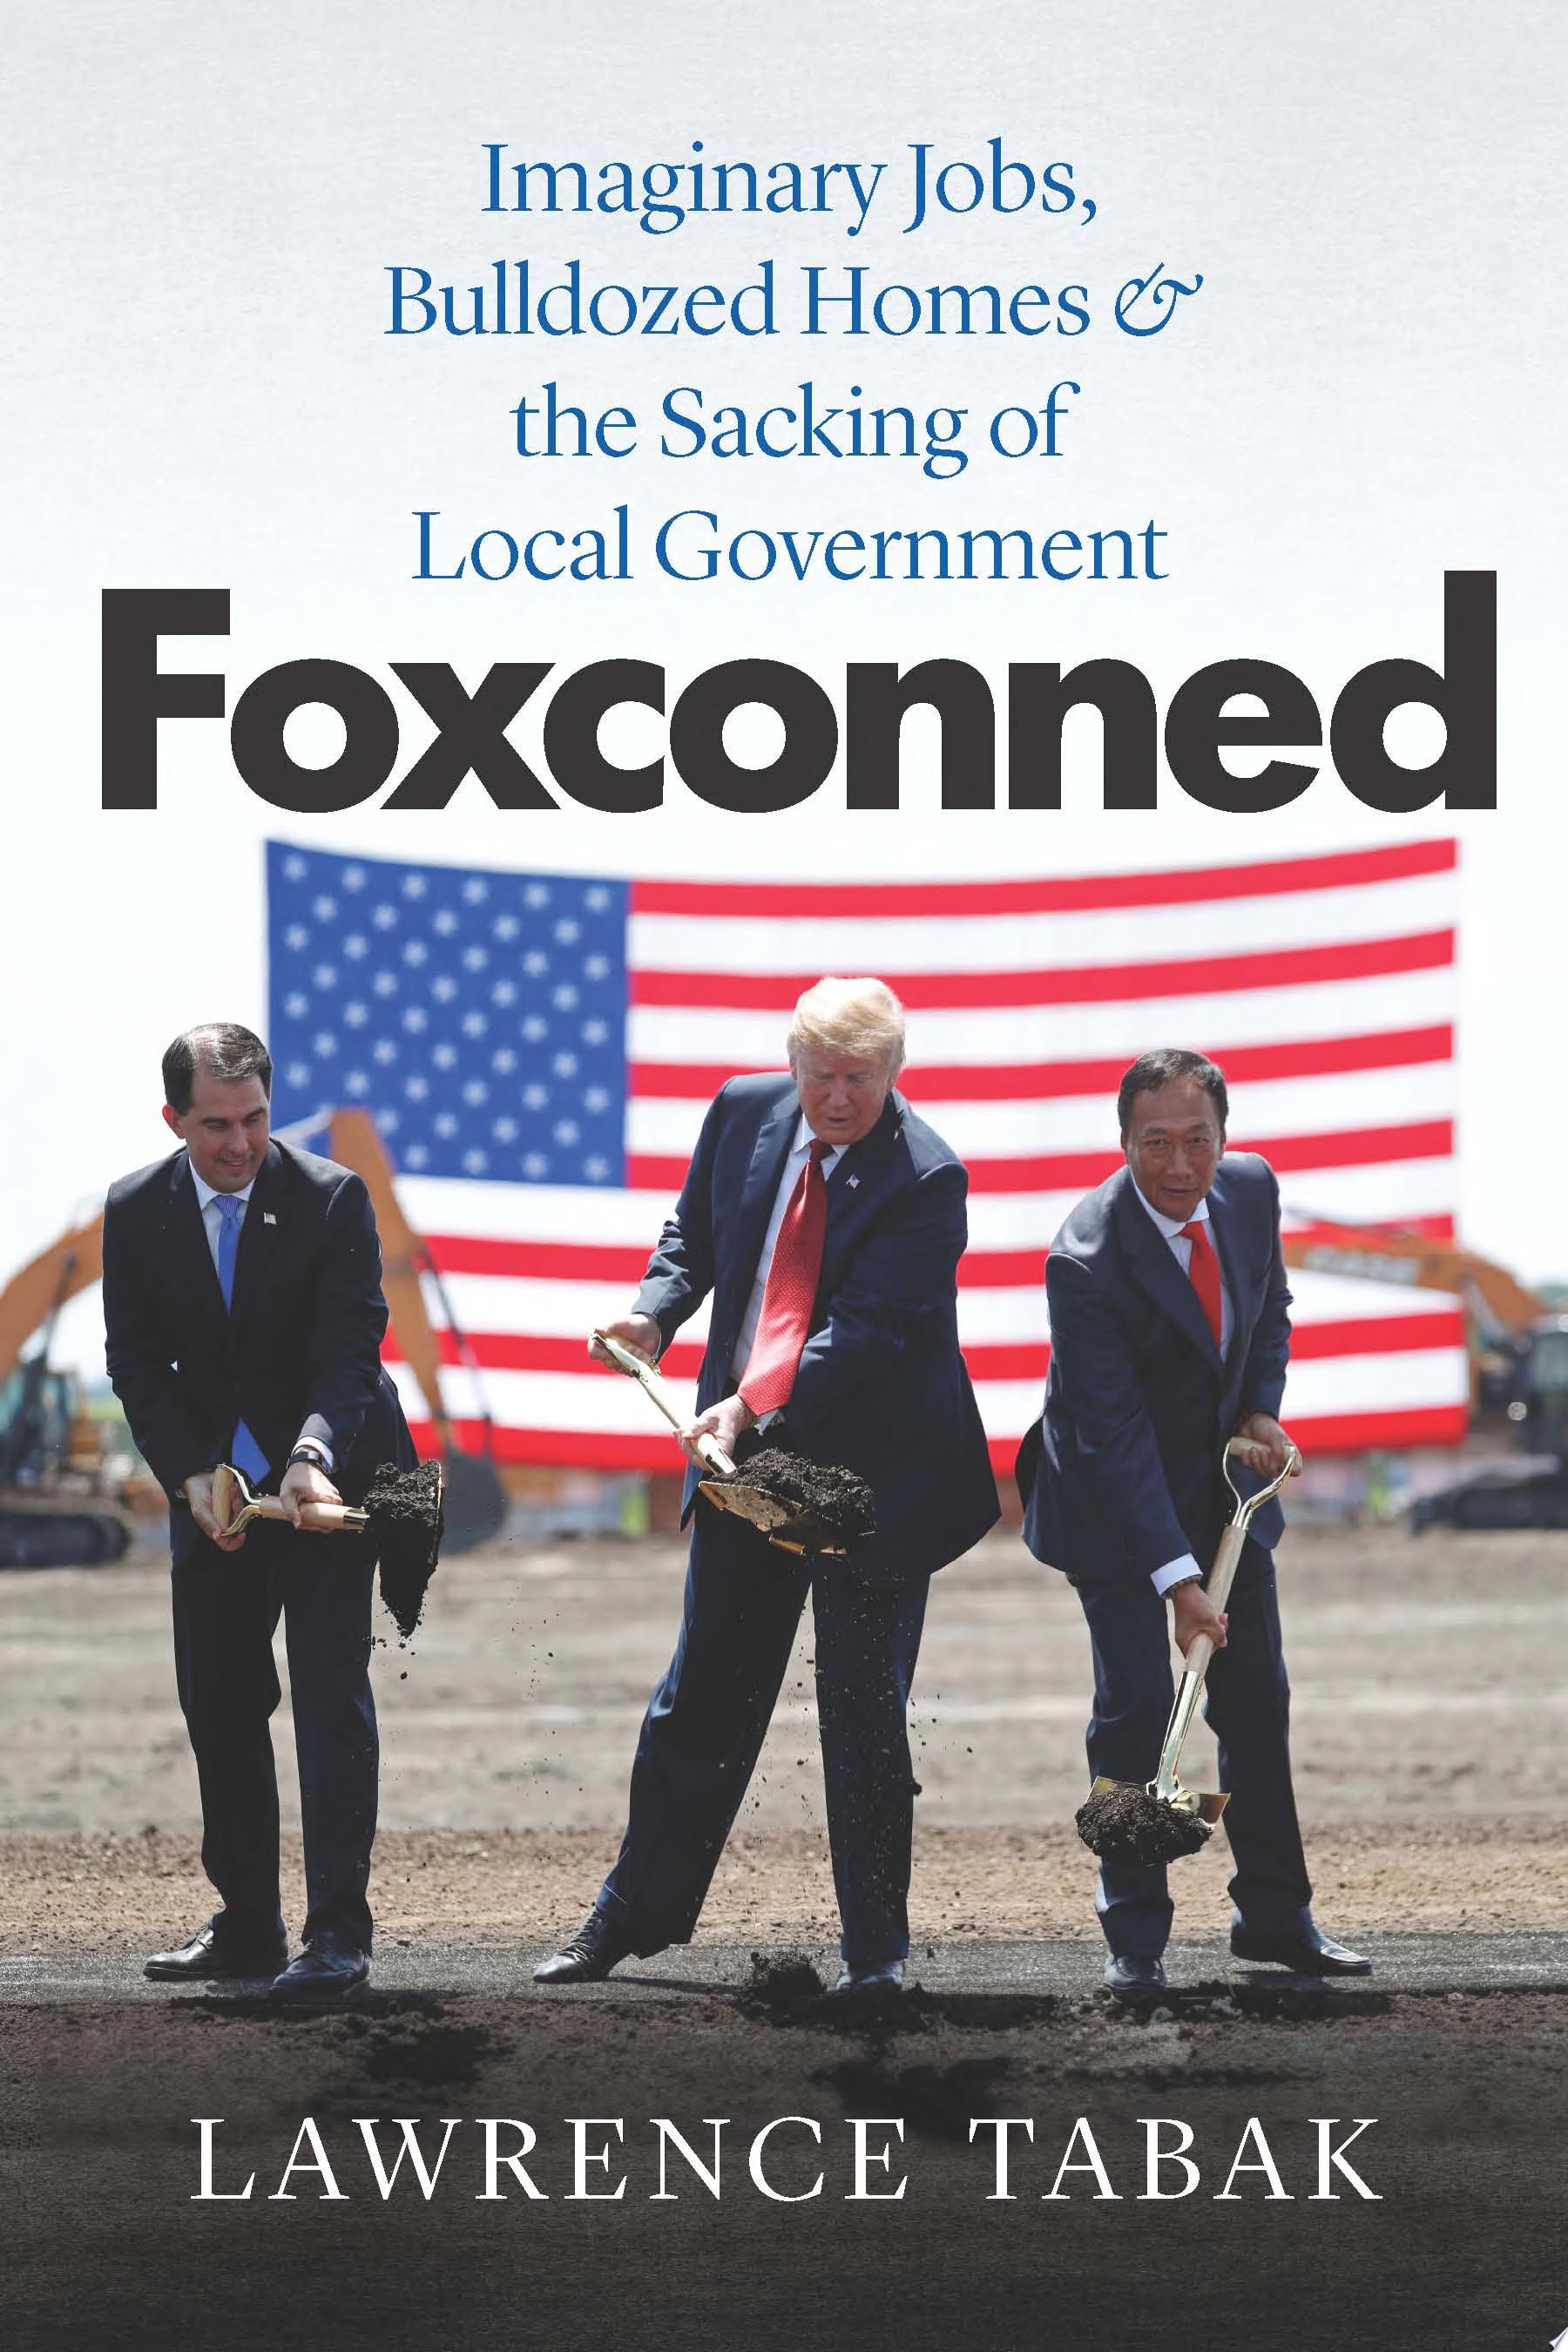 Image for "Foxconned"